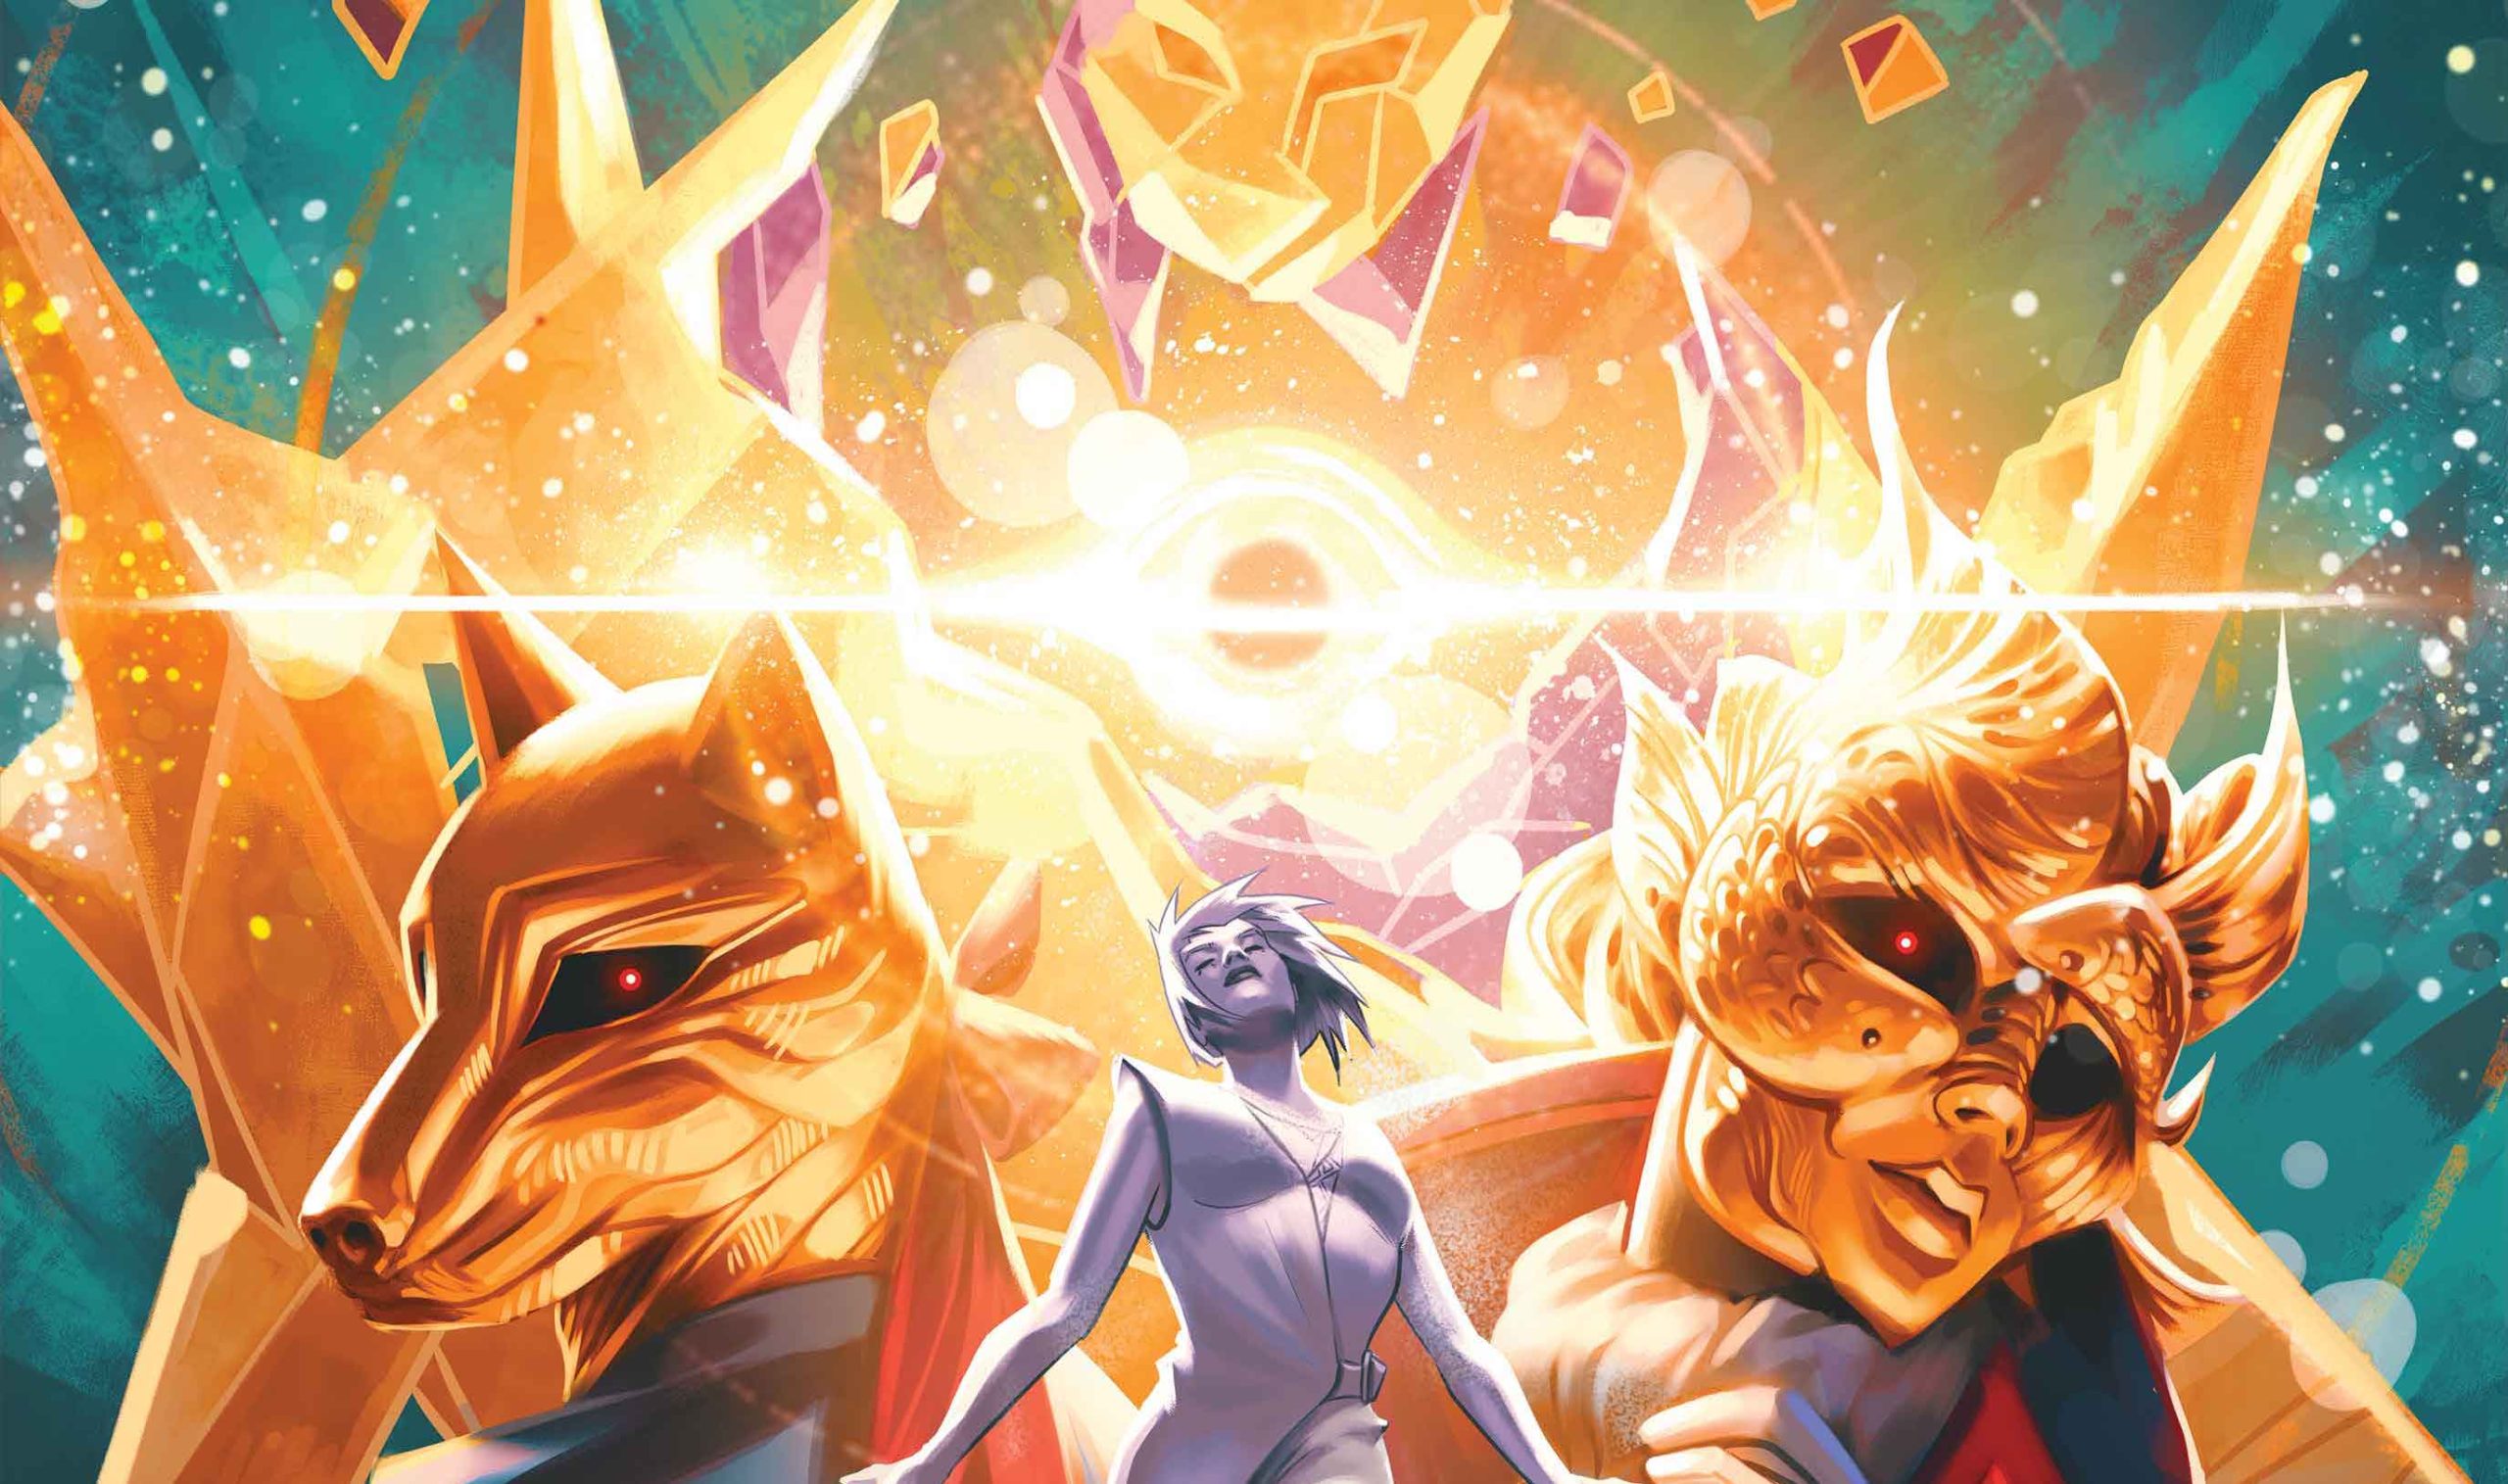 Witness the Living Tribunal in new 'G.O.D.S.' #6 cover reveal